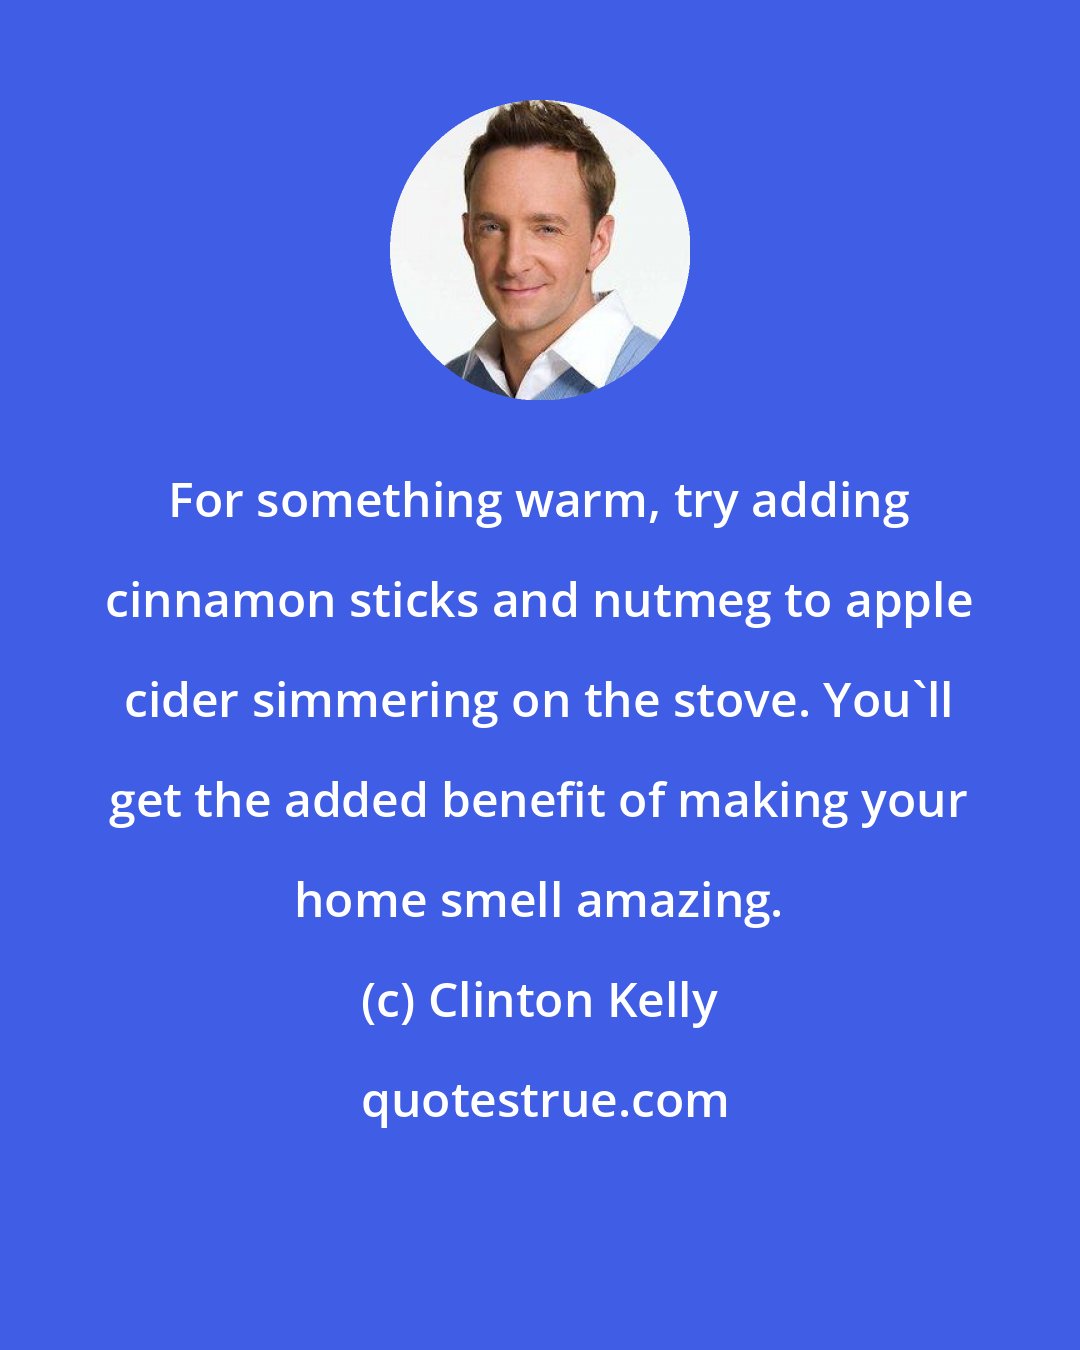 Clinton Kelly: For something warm, try adding cinnamon sticks and nutmeg to apple cider simmering on the stove. You'll get the added benefit of making your home smell amazing.